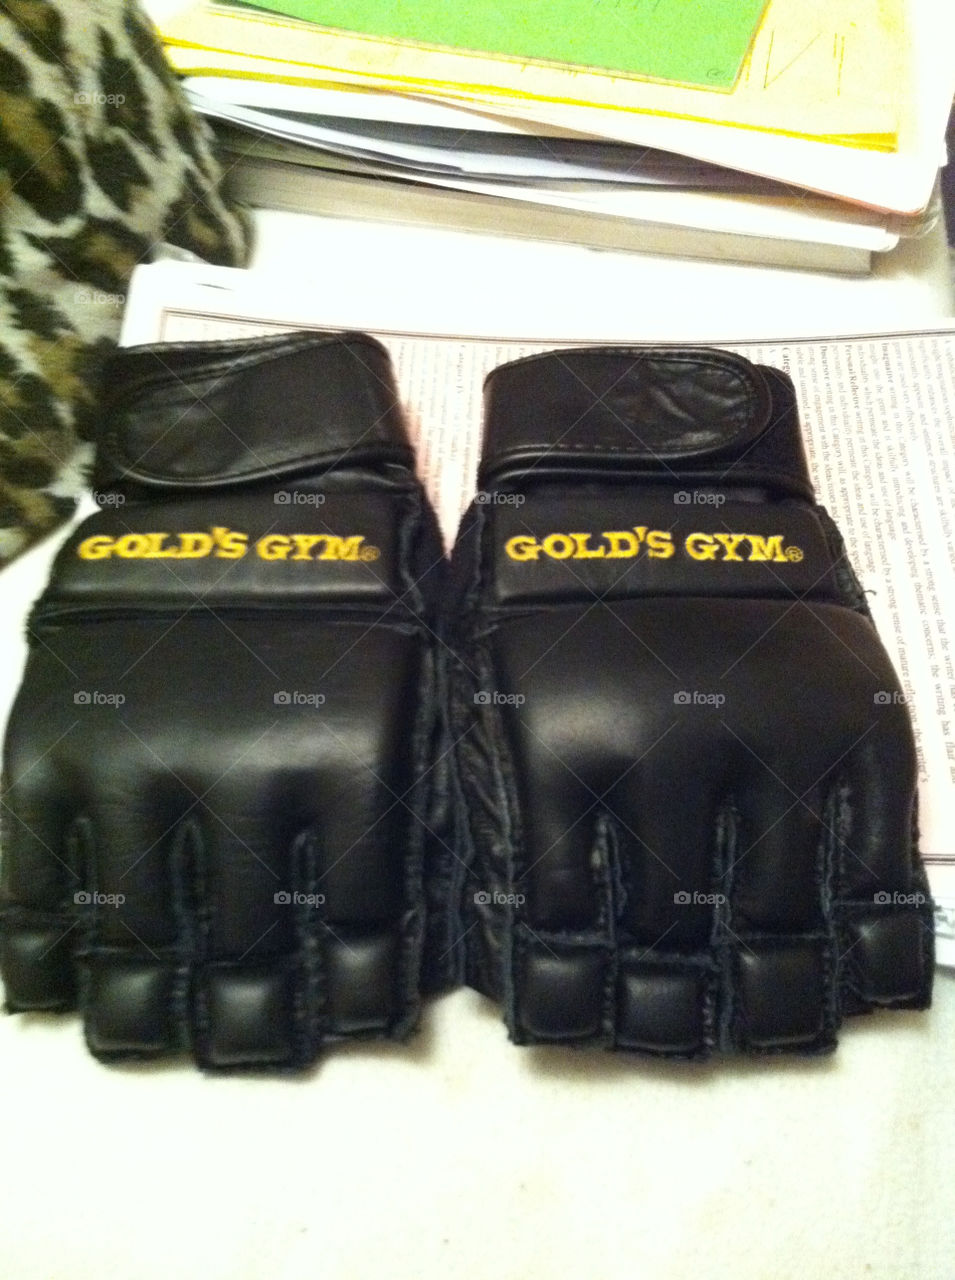 MMA leather gloves